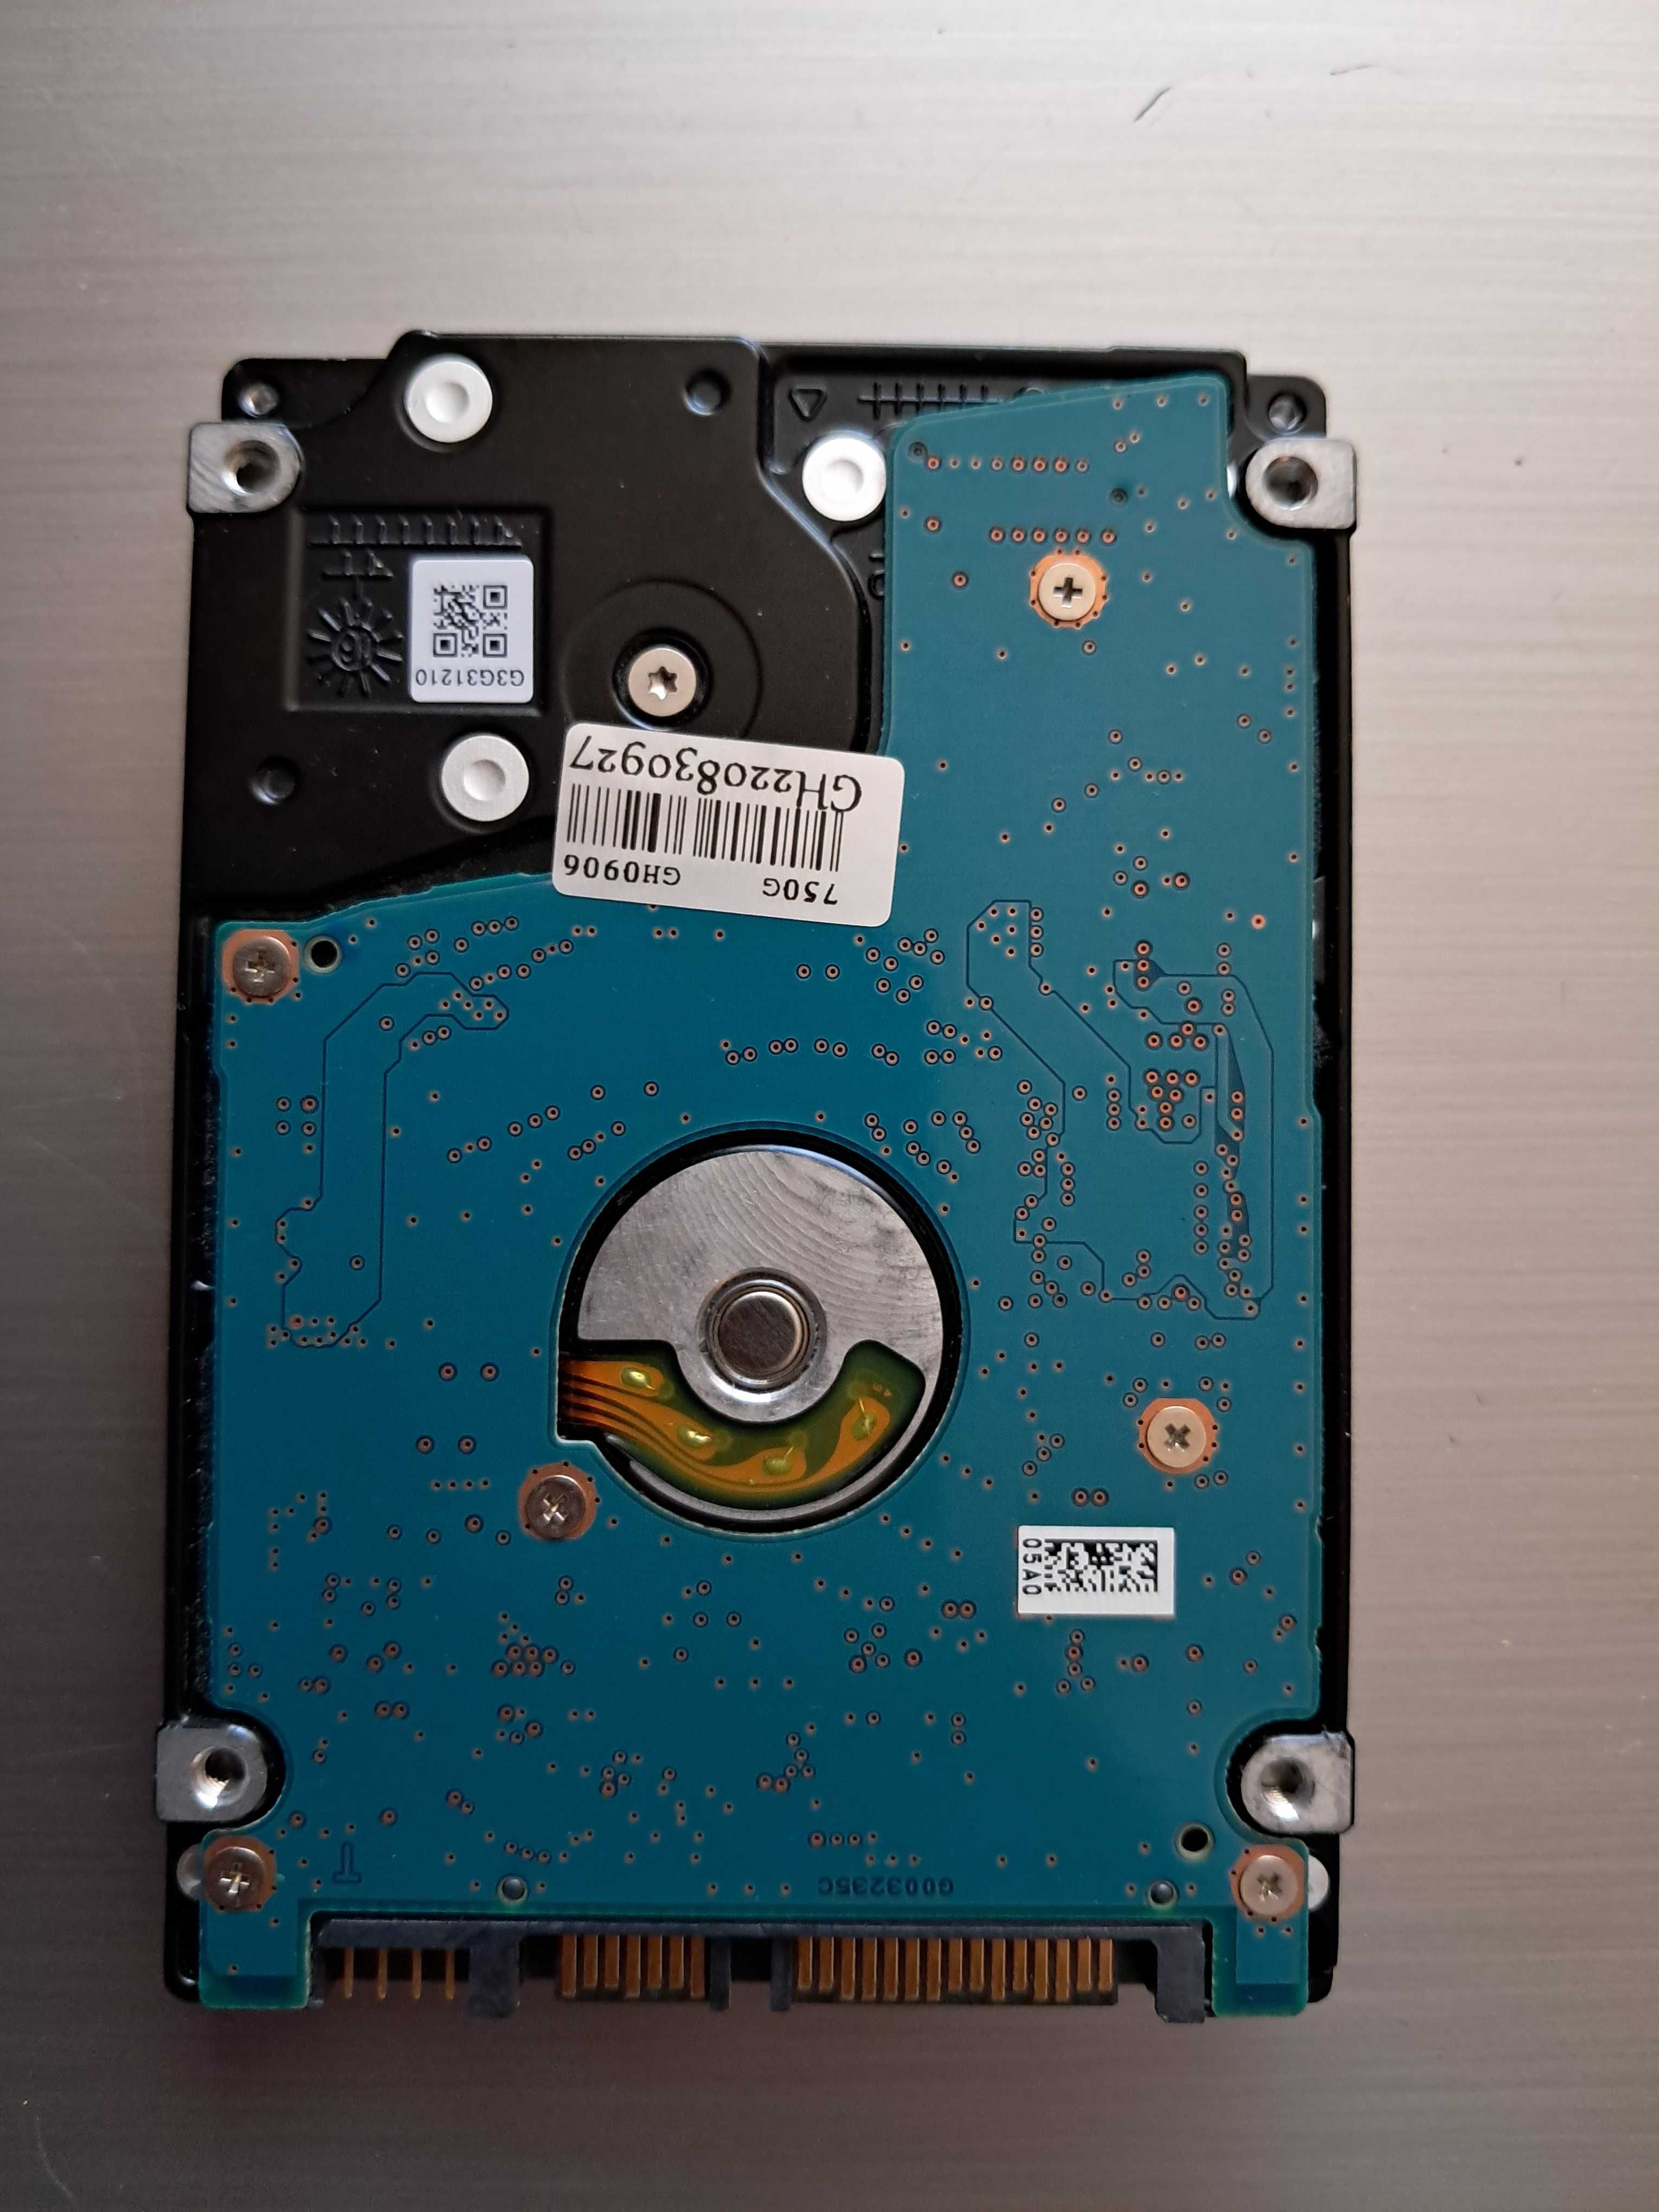 HDD Жесткий диск WD 750GB, WD7500BEVT, Б/У